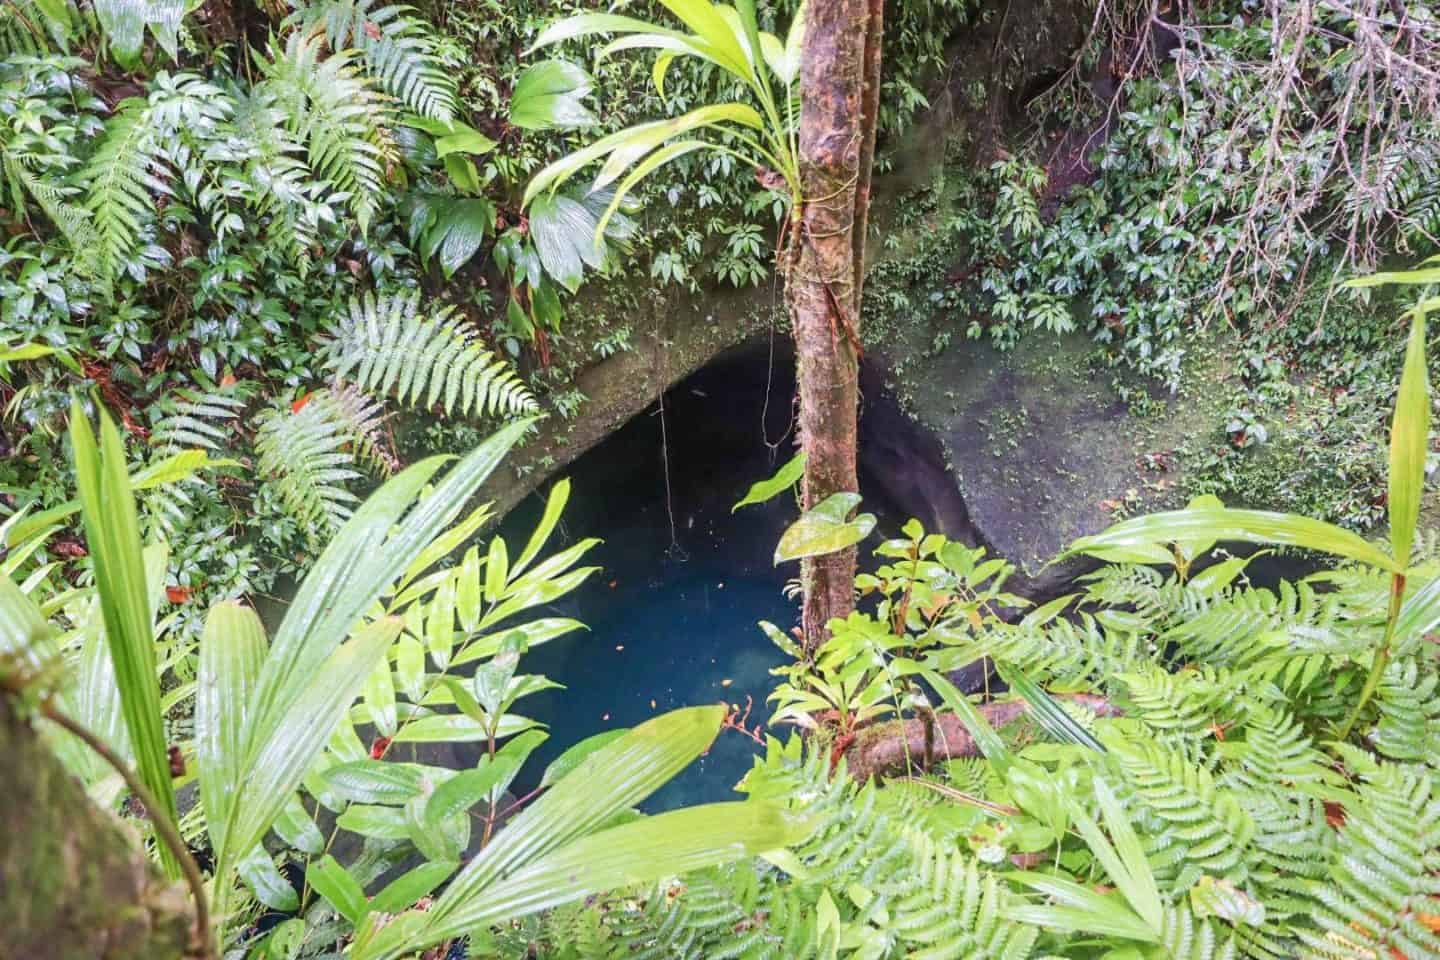 The Wandering Quinn Travel Blog dominica travel guide, titou gorge pirates of the caribbean location dominica